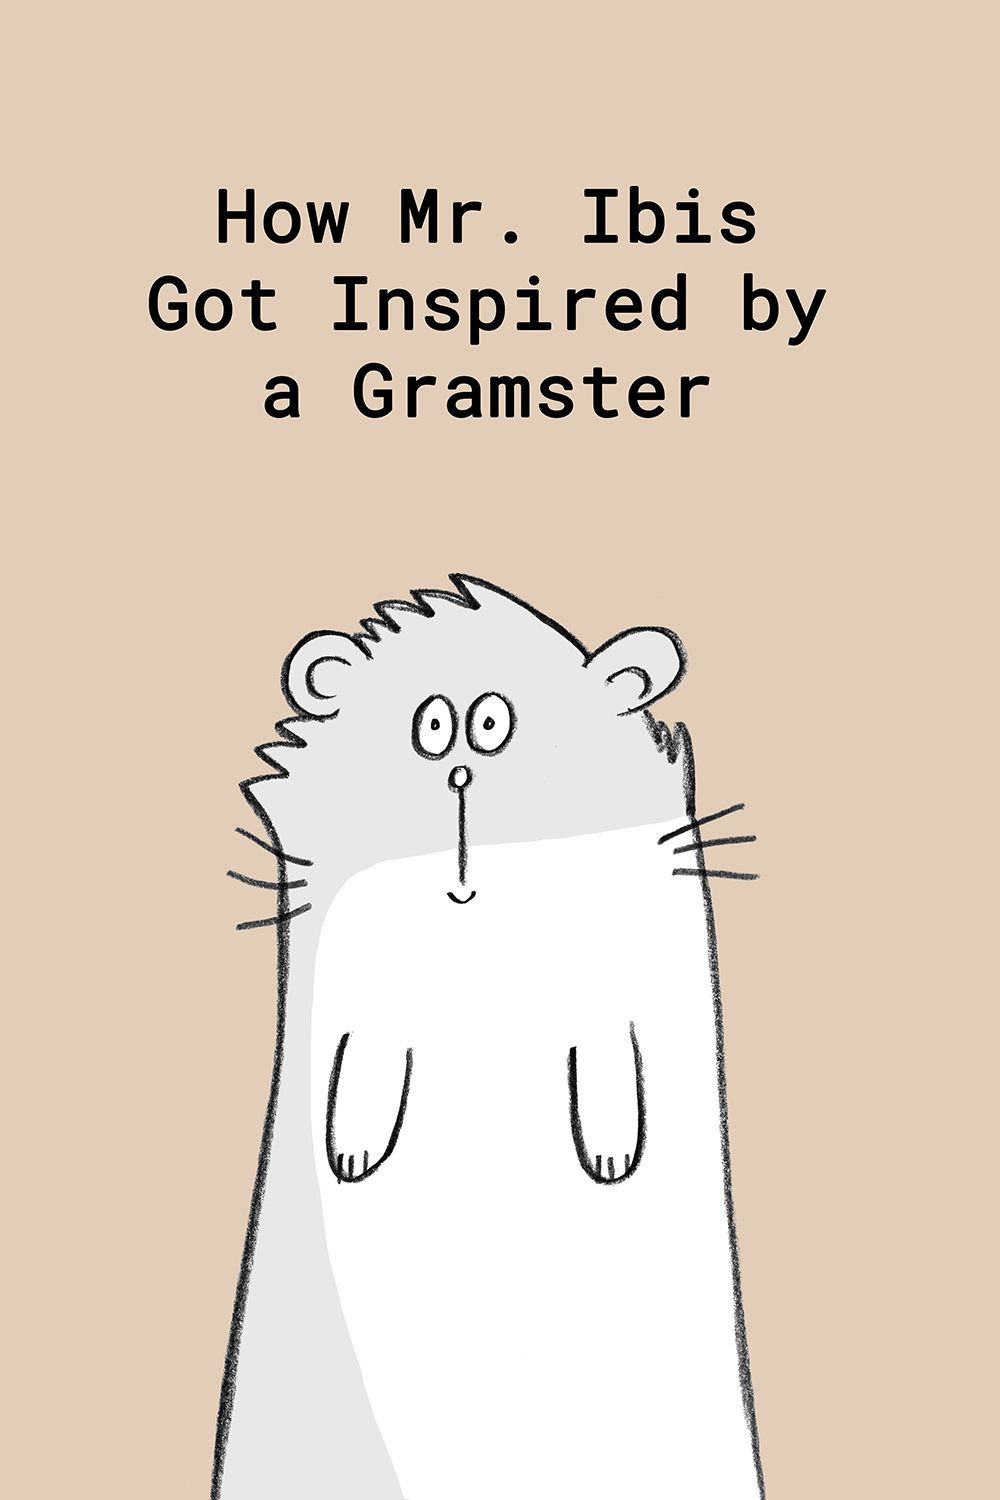 How Mr. Ibis Got Inspired by a Gramster